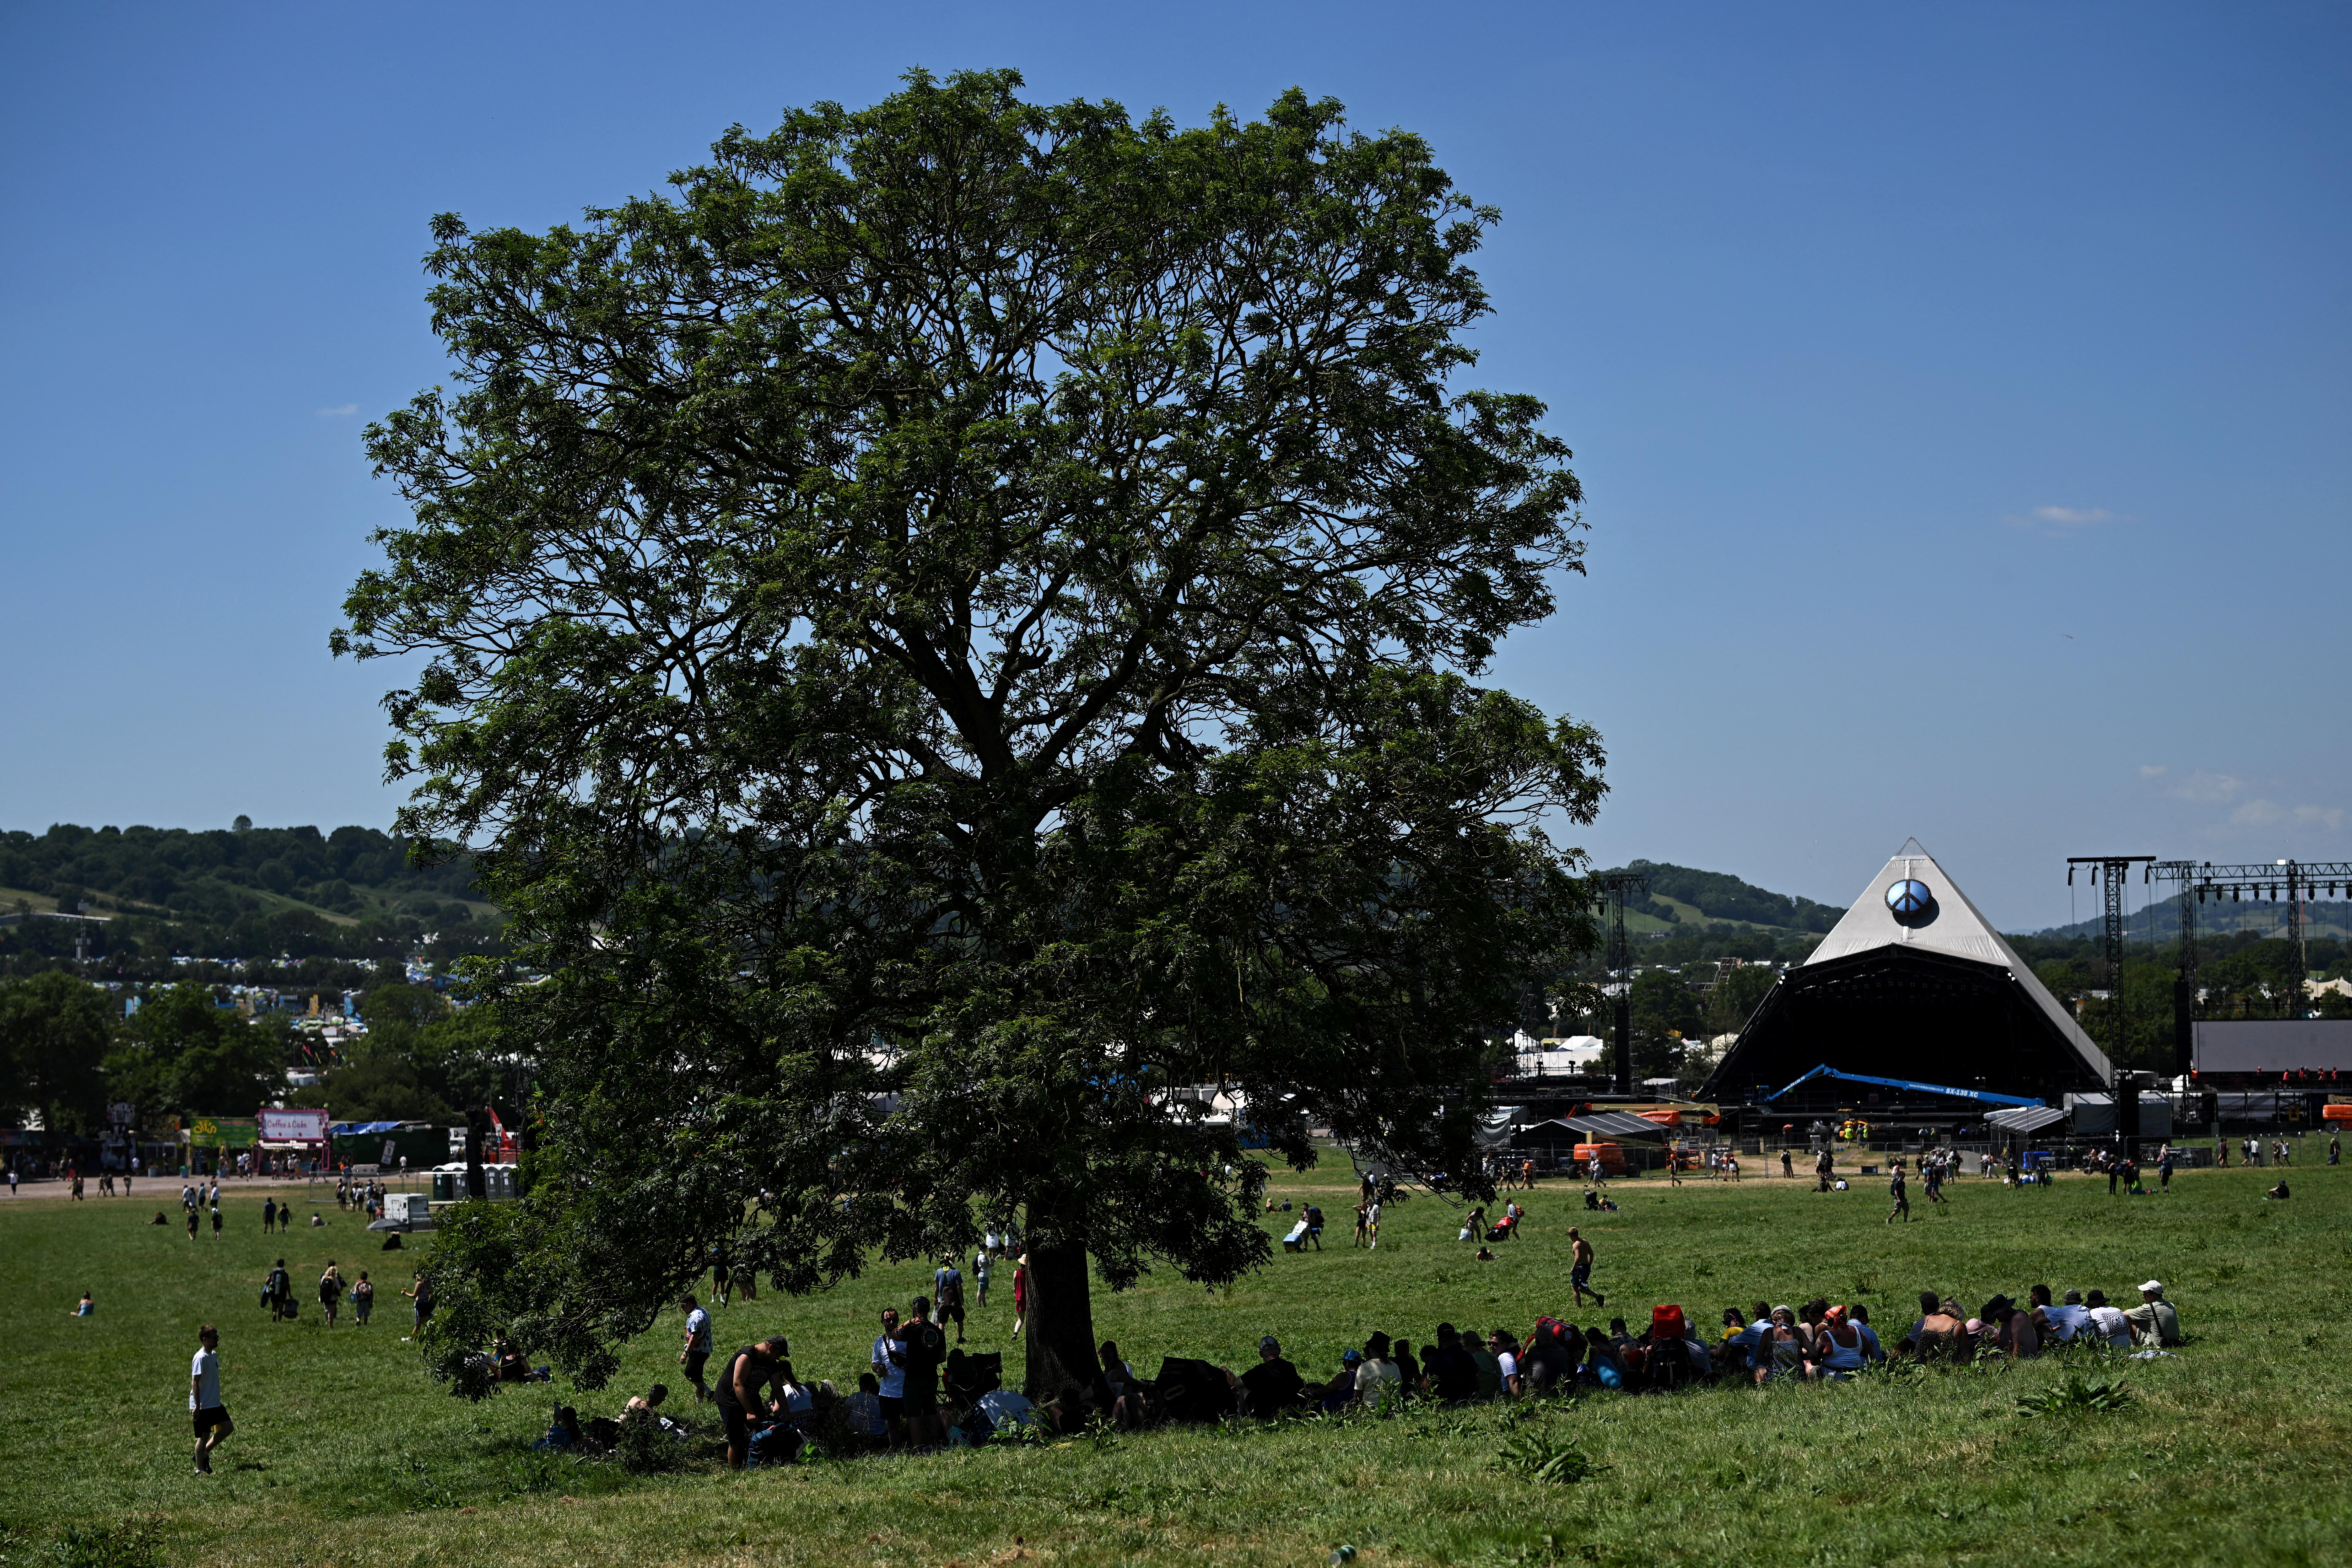 Revellers shade under a tree at Worthy Farm in Somerset during the Glastonbury Festival